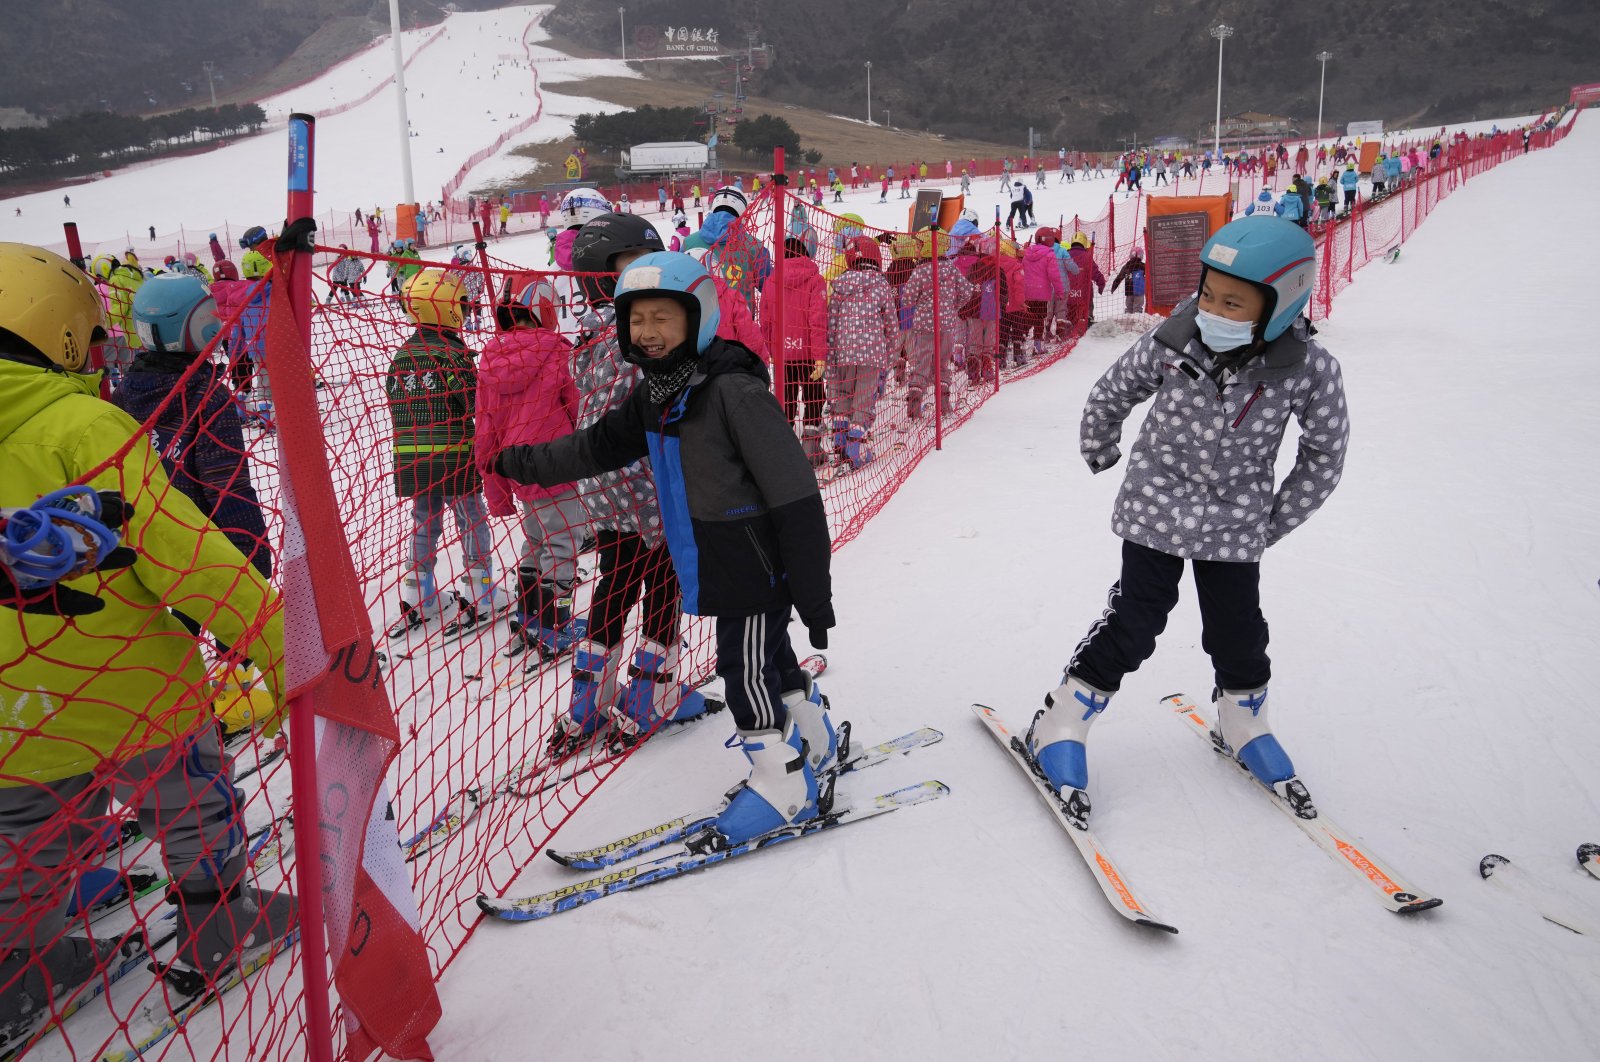 School children play near a long line up to the bunny slope at a ski resort, in Yanqing, China, Dec. 23, 2021. (AP Photo)